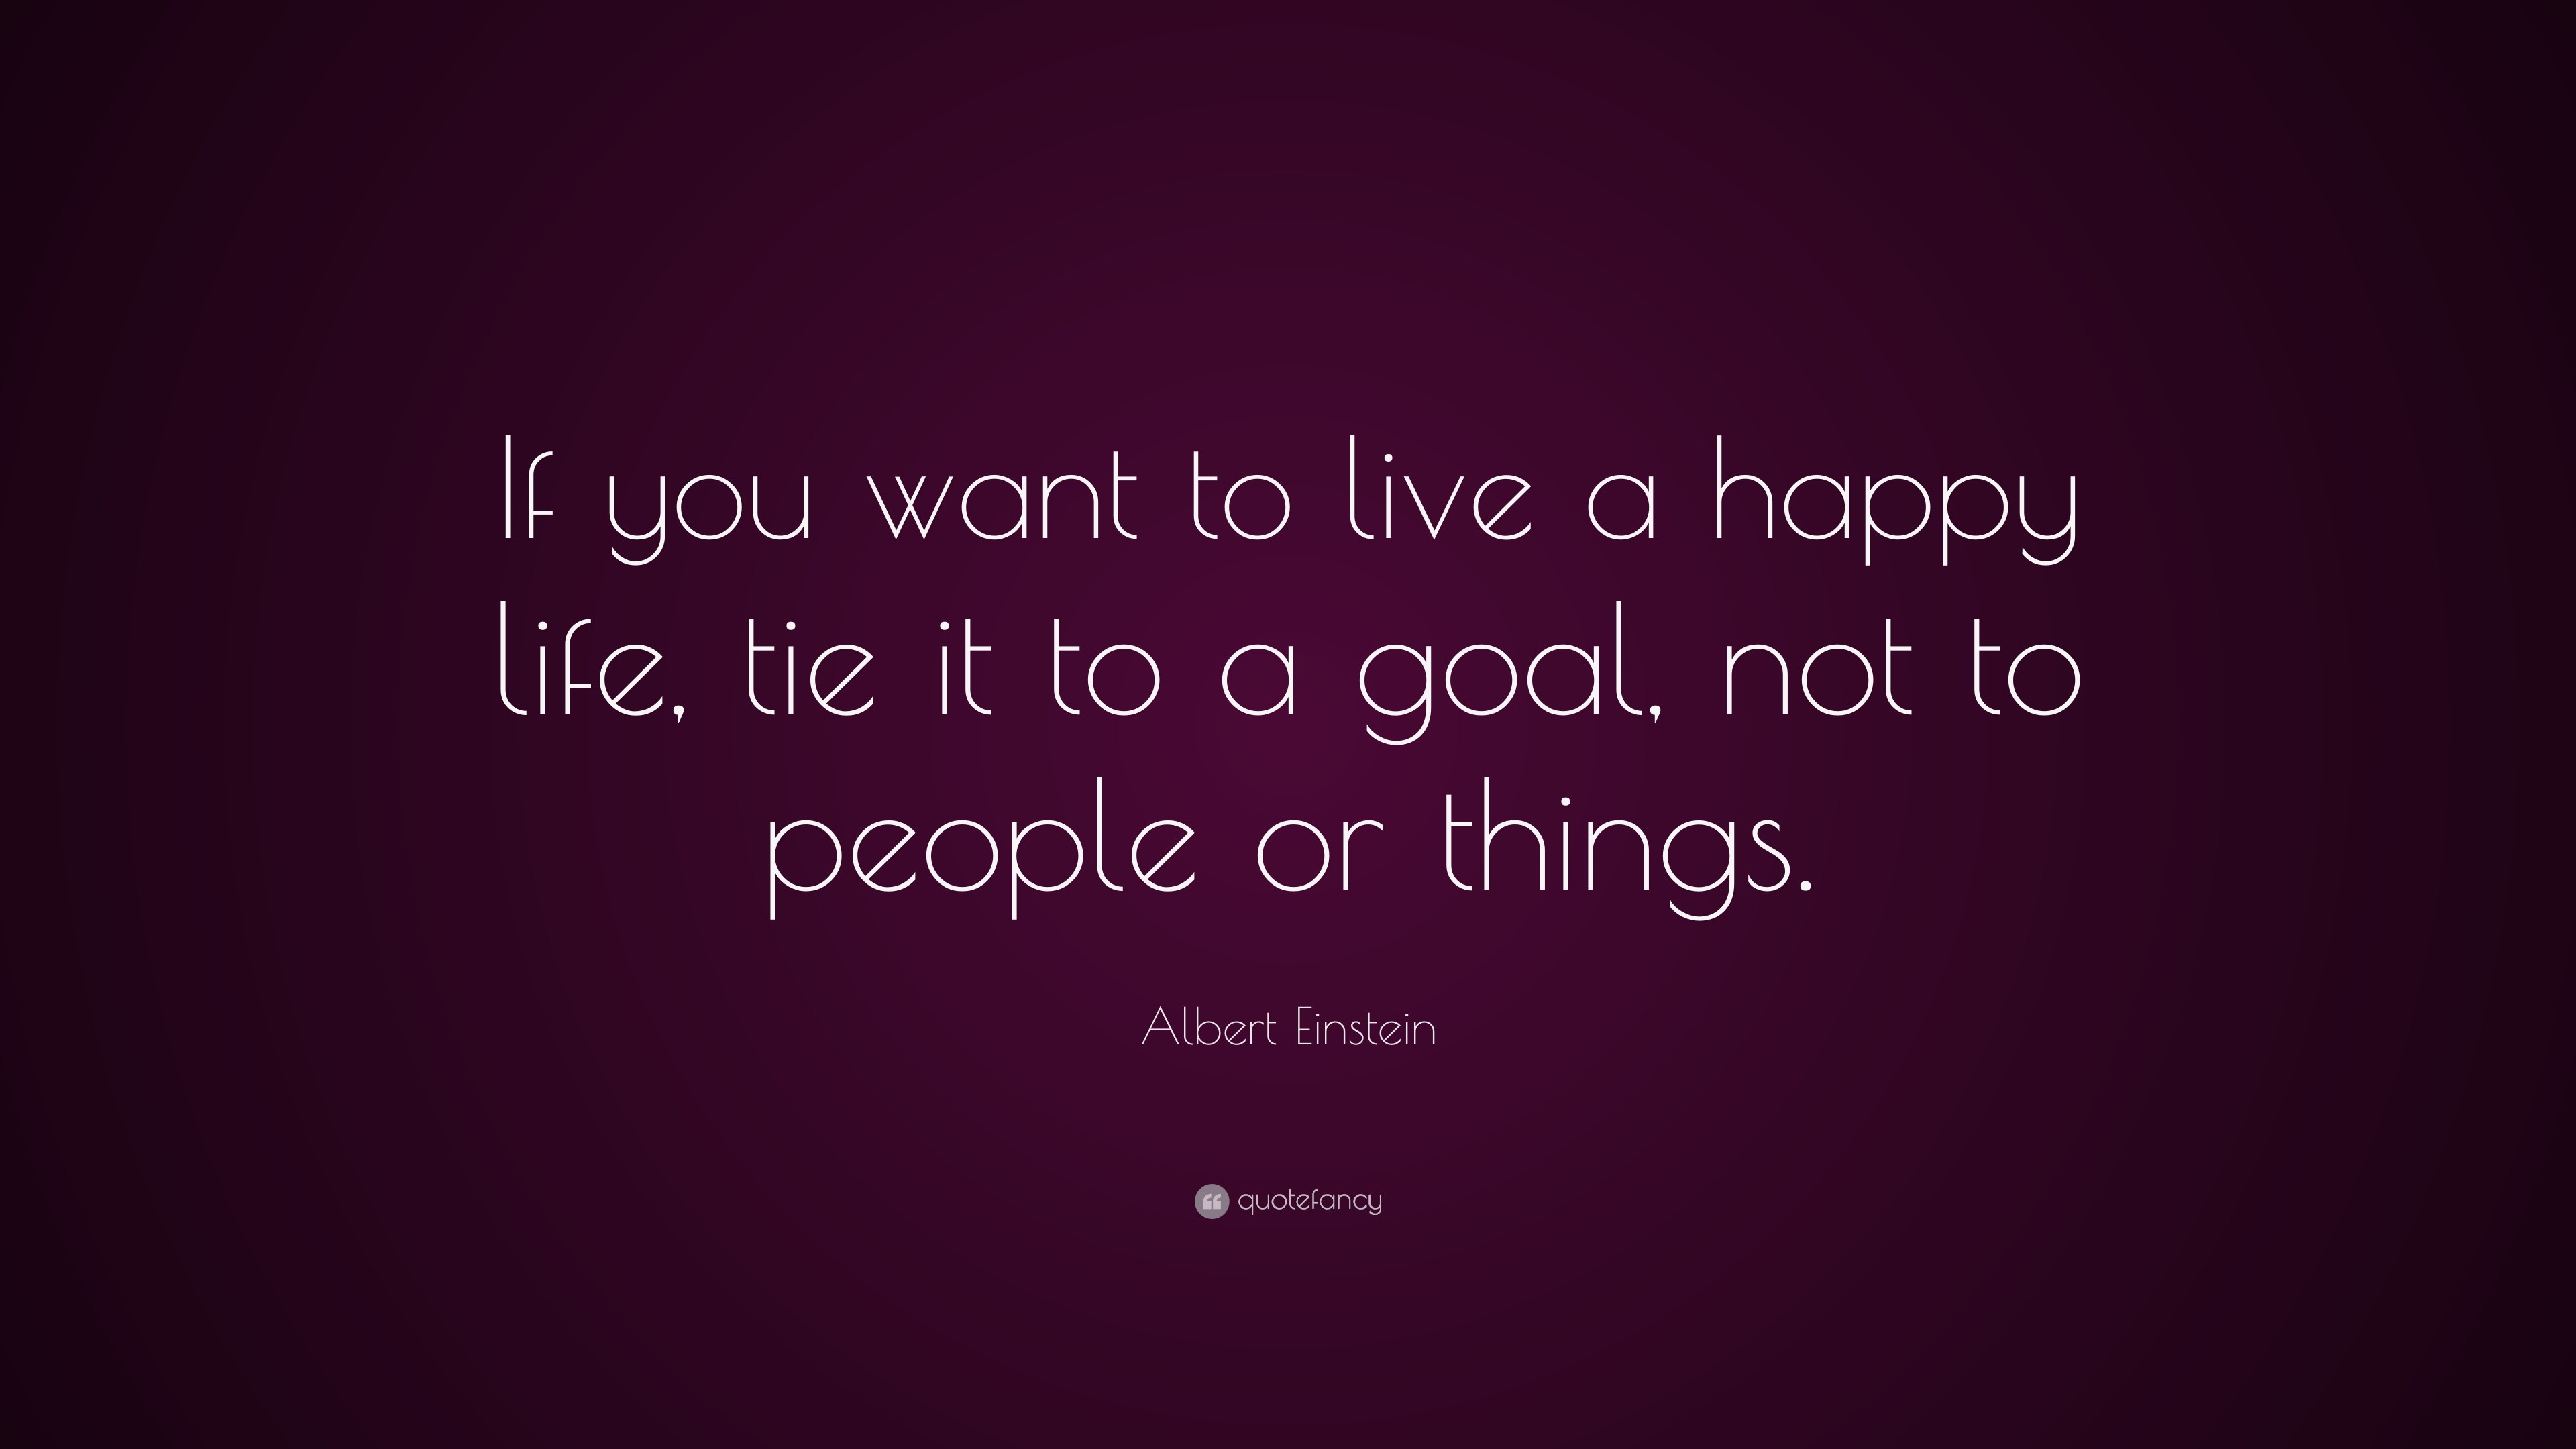 Albert Einstein Quote “If you want to live a happy life tie it